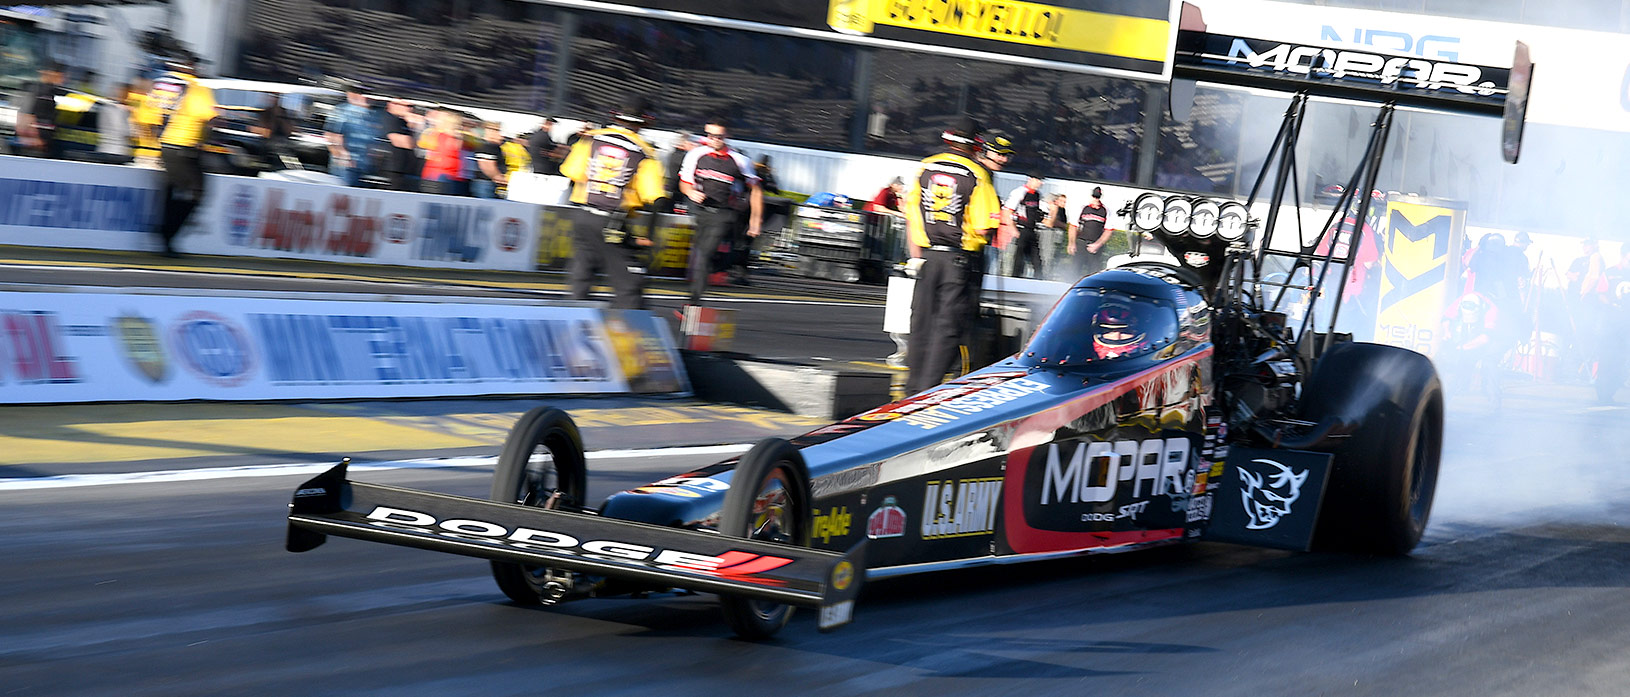 Leah Pritchett racing her top fuel dragster at NHRA Winternationals